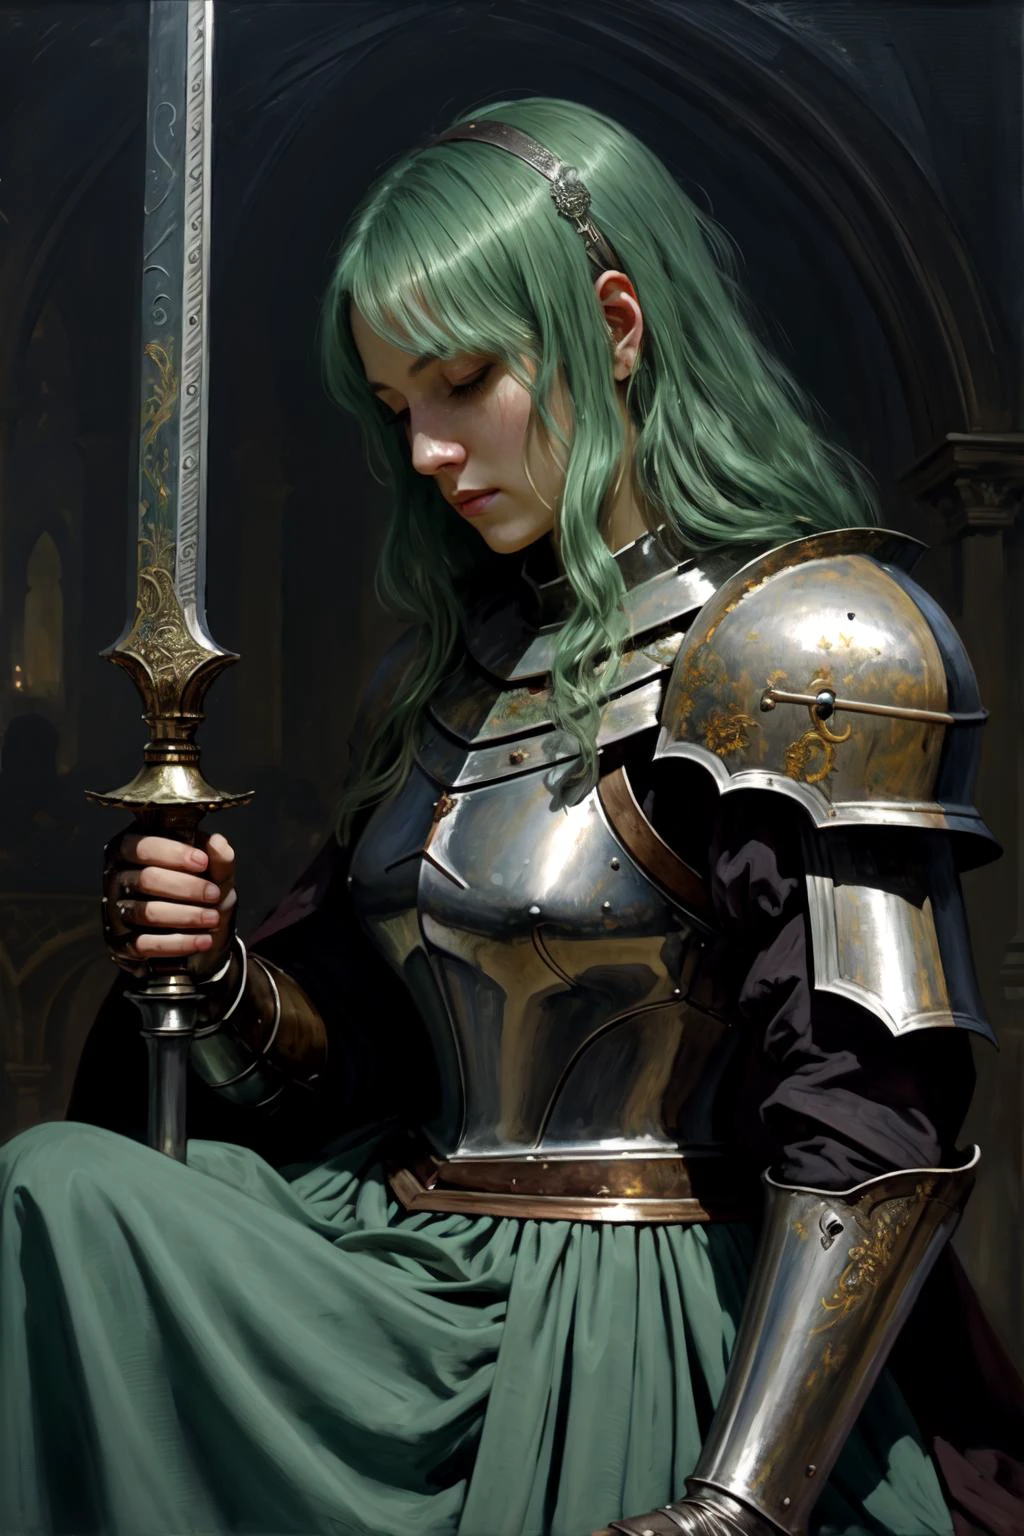 (best quality, masterpiece, high resolution:1.2),  A detailed oil painting of a beautiful,captivating painting,centered,closeup,zoomed, (sad female knight sitting and holding a sword:1.2),cute,elegant,tears,melancholy,wearing detailed armor,pauldrons,gloves,blood on face,Mint green hair,floating hair, BREAK
(encircled by a group of beautiful, passionate and loving women:1.25). The detailed composition is influenced by the artistic styles of Tadeusz Pruszkówski and Juraj Julije Klovic and Alessandro Biffignandi, drawing inspiration from the dark and emotionally charged atmospheres of "Dark Souls" and "The Lord of the Rings and manga "Berserk." The narrative within the canvas beautifully portrays the knight's melancholy, juxtaposed against the backdrop of the joyful and loving atmosphere created by the surrounding women.
dark fantasy,vibrant colors,( nsfw,uncensored),brushstrokes,oil on canvas, gloomy, poignant atmosphere,melancholic aura, hauntingly captivating,magnificent, dark fantasy art,(Canaletto Giovanni:0.25),(Art Nouveau:0.1)
